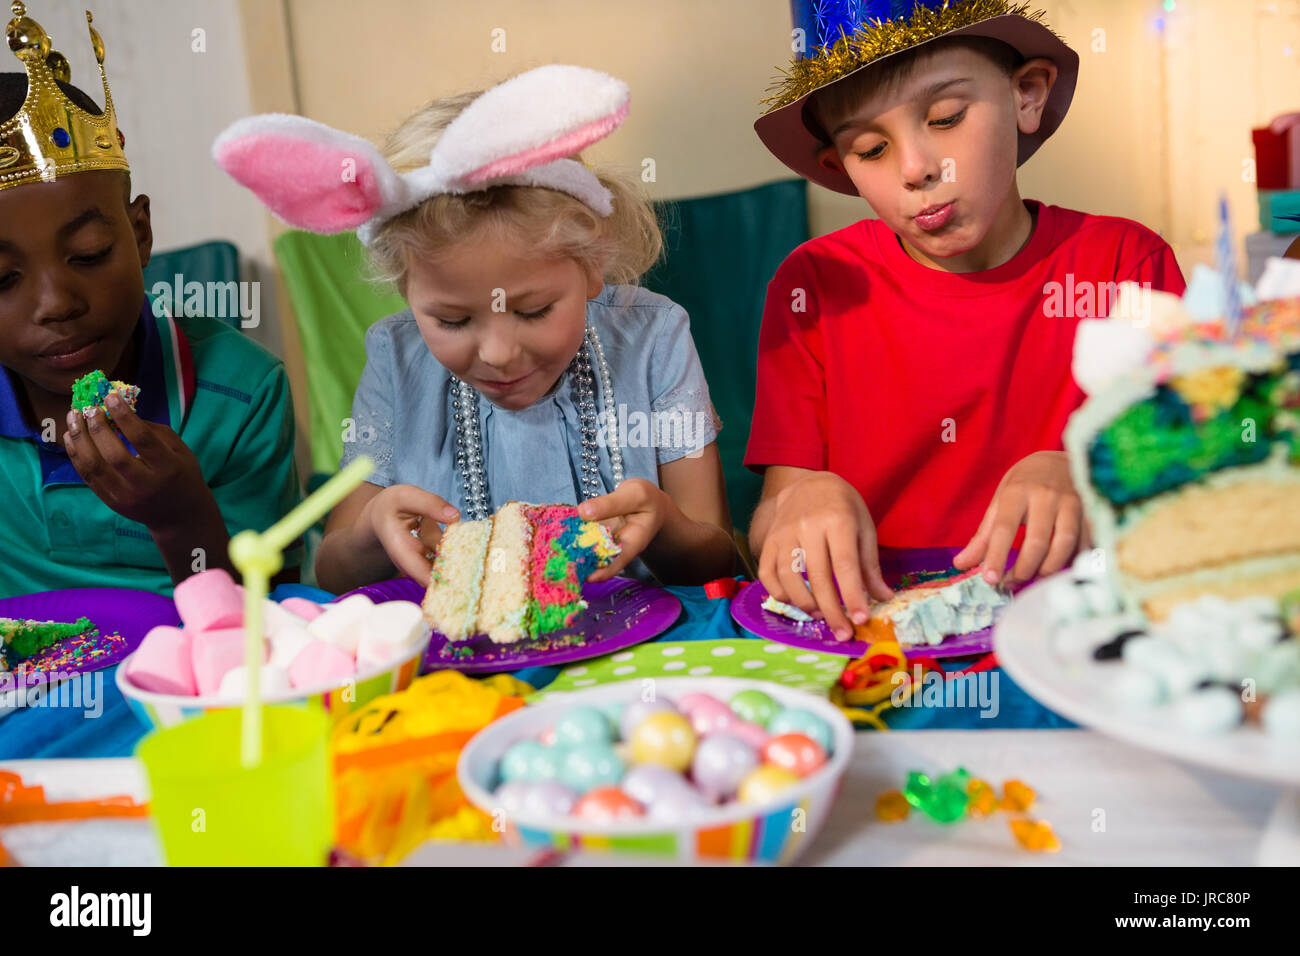 Children having cake while sitting at table during birthday party Stock Photo